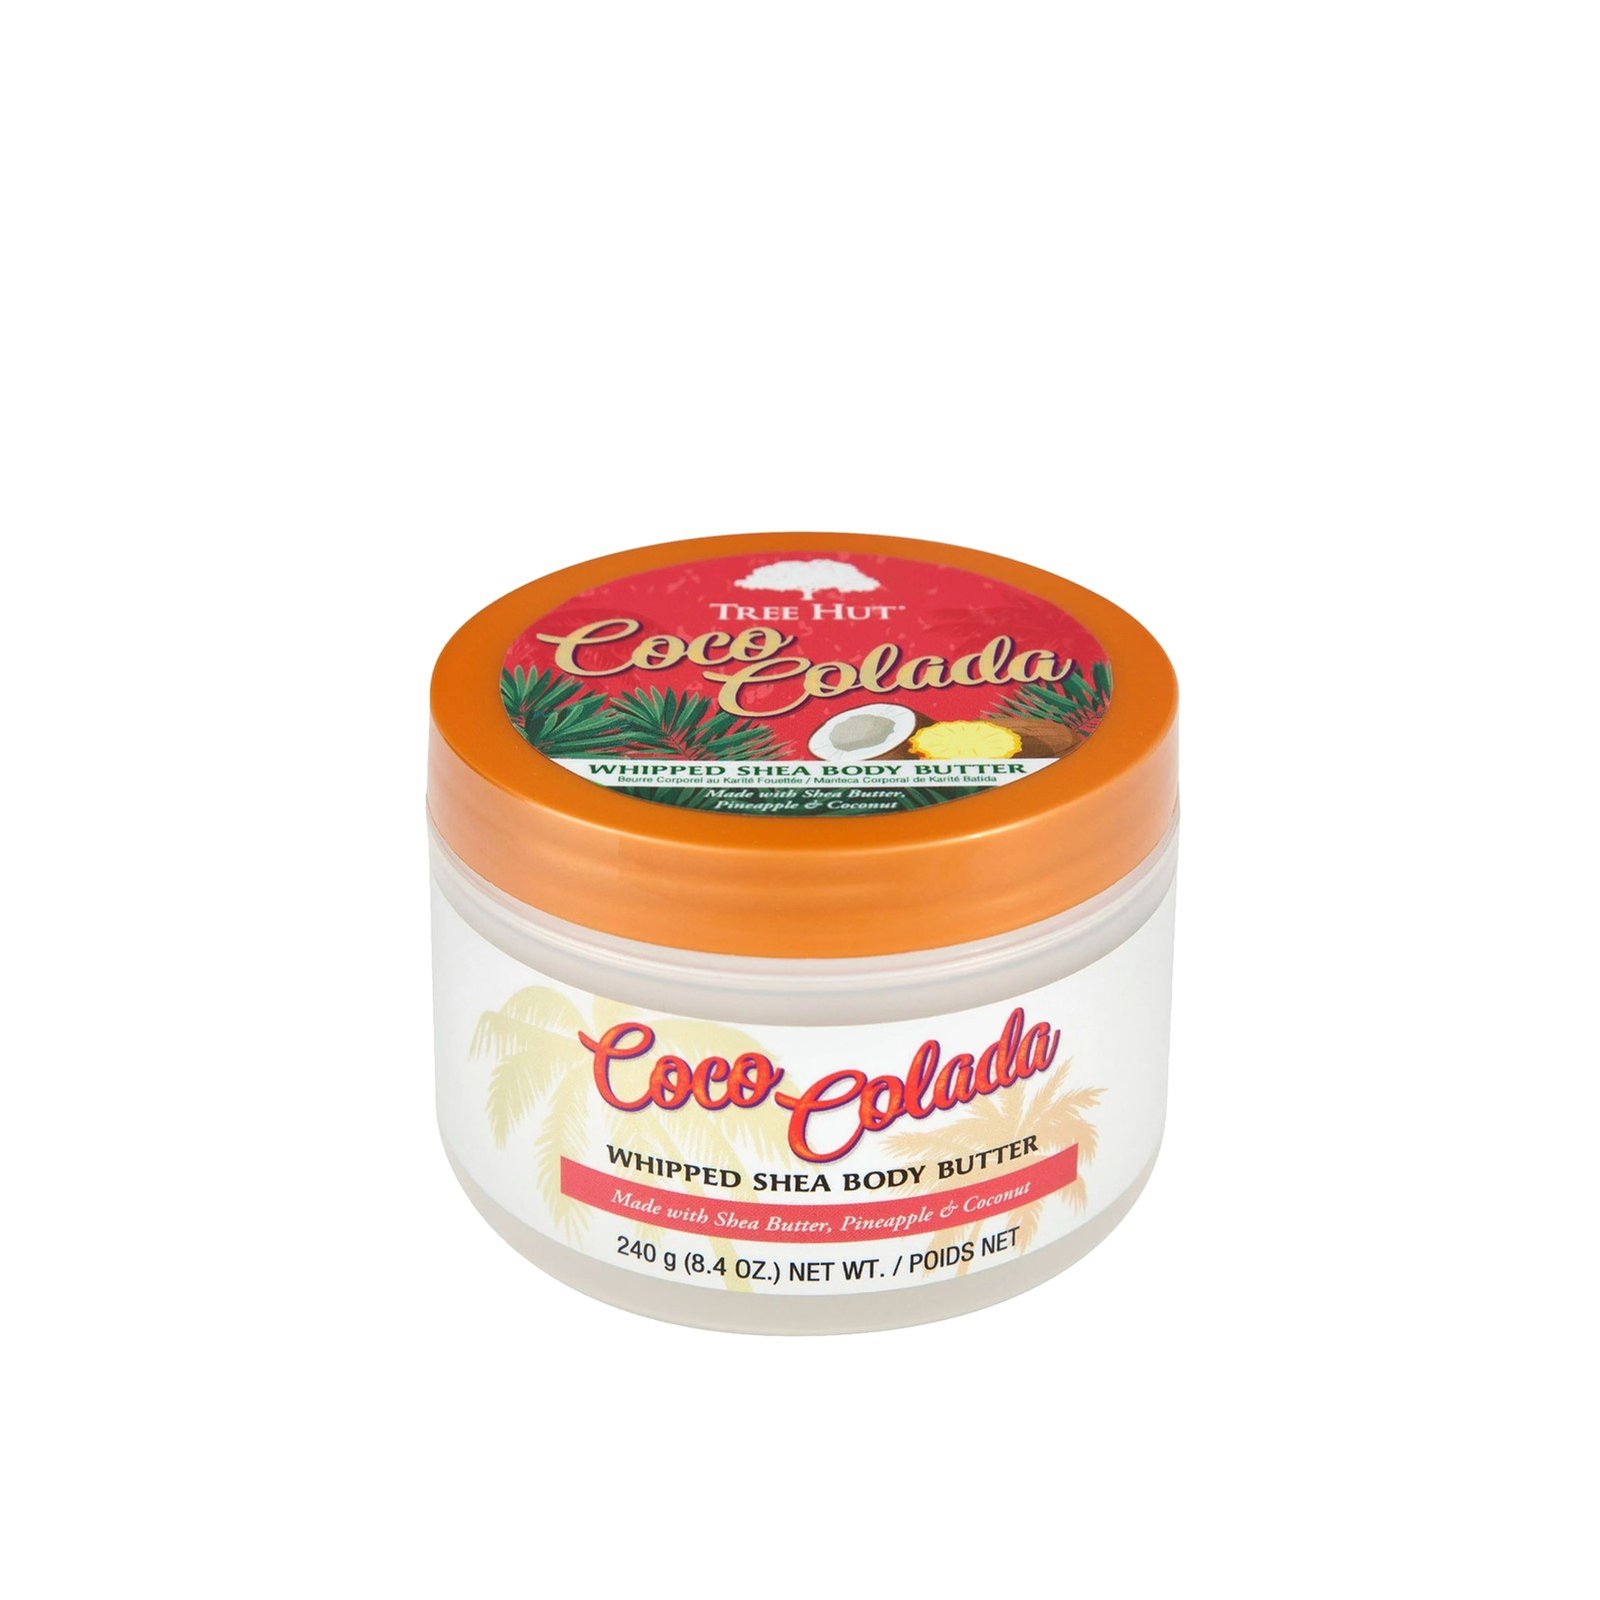 Tree Hut Coco Colada Whipped Shea Body Butter 240g